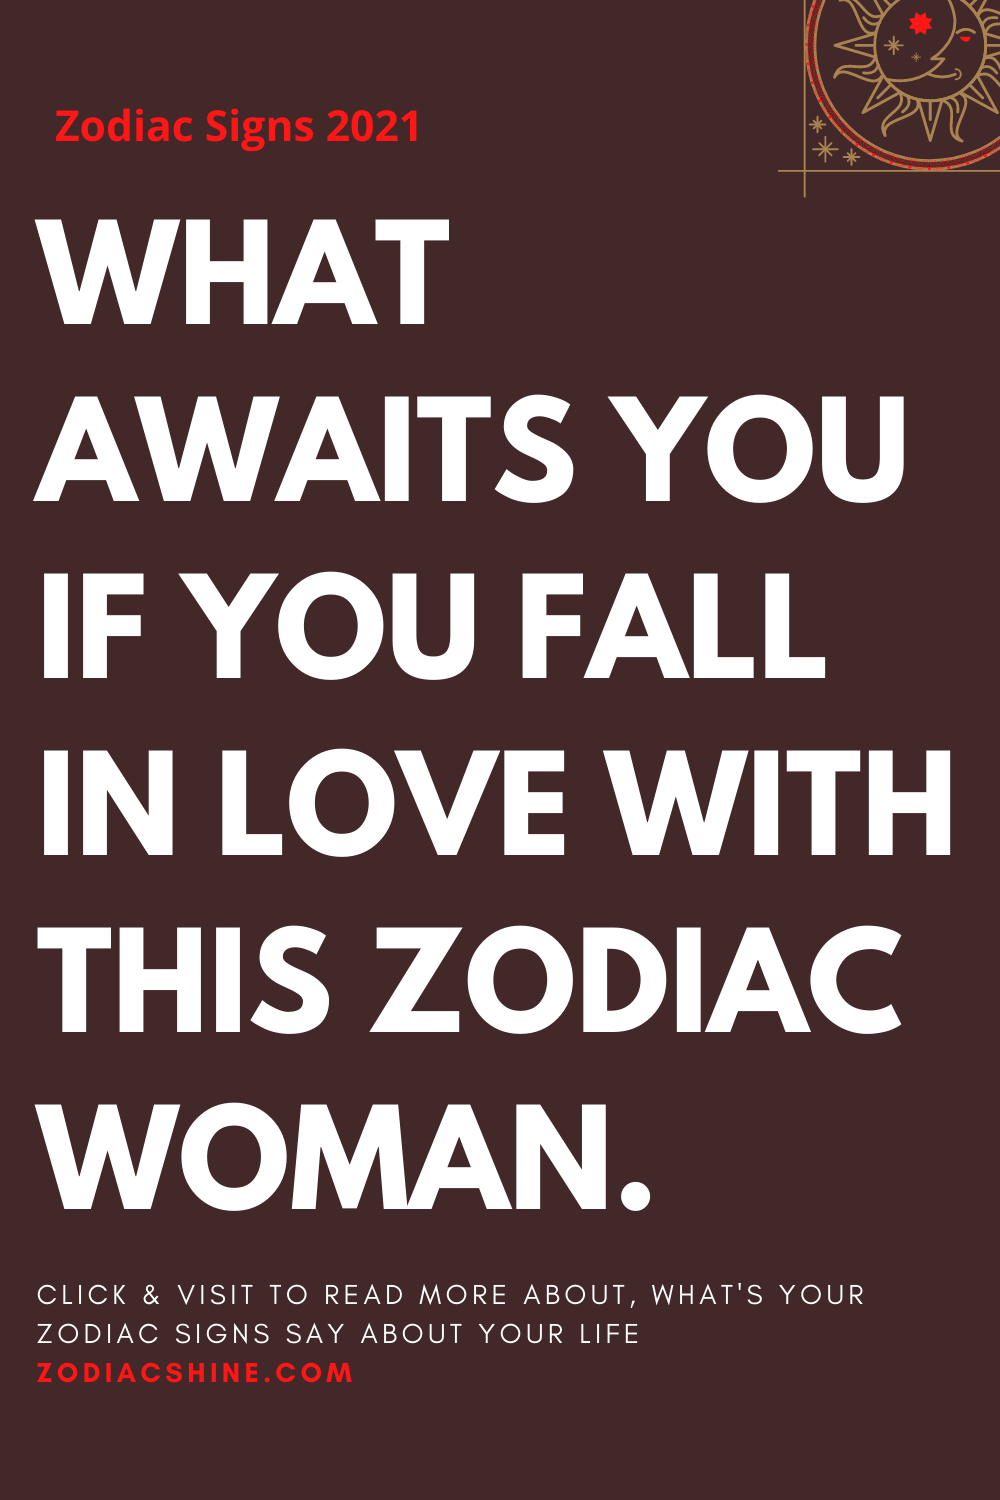 WHAT AWAITS YOU IF YOU FALL IN LOVE WITH THIS ZODIAC WOMAN.